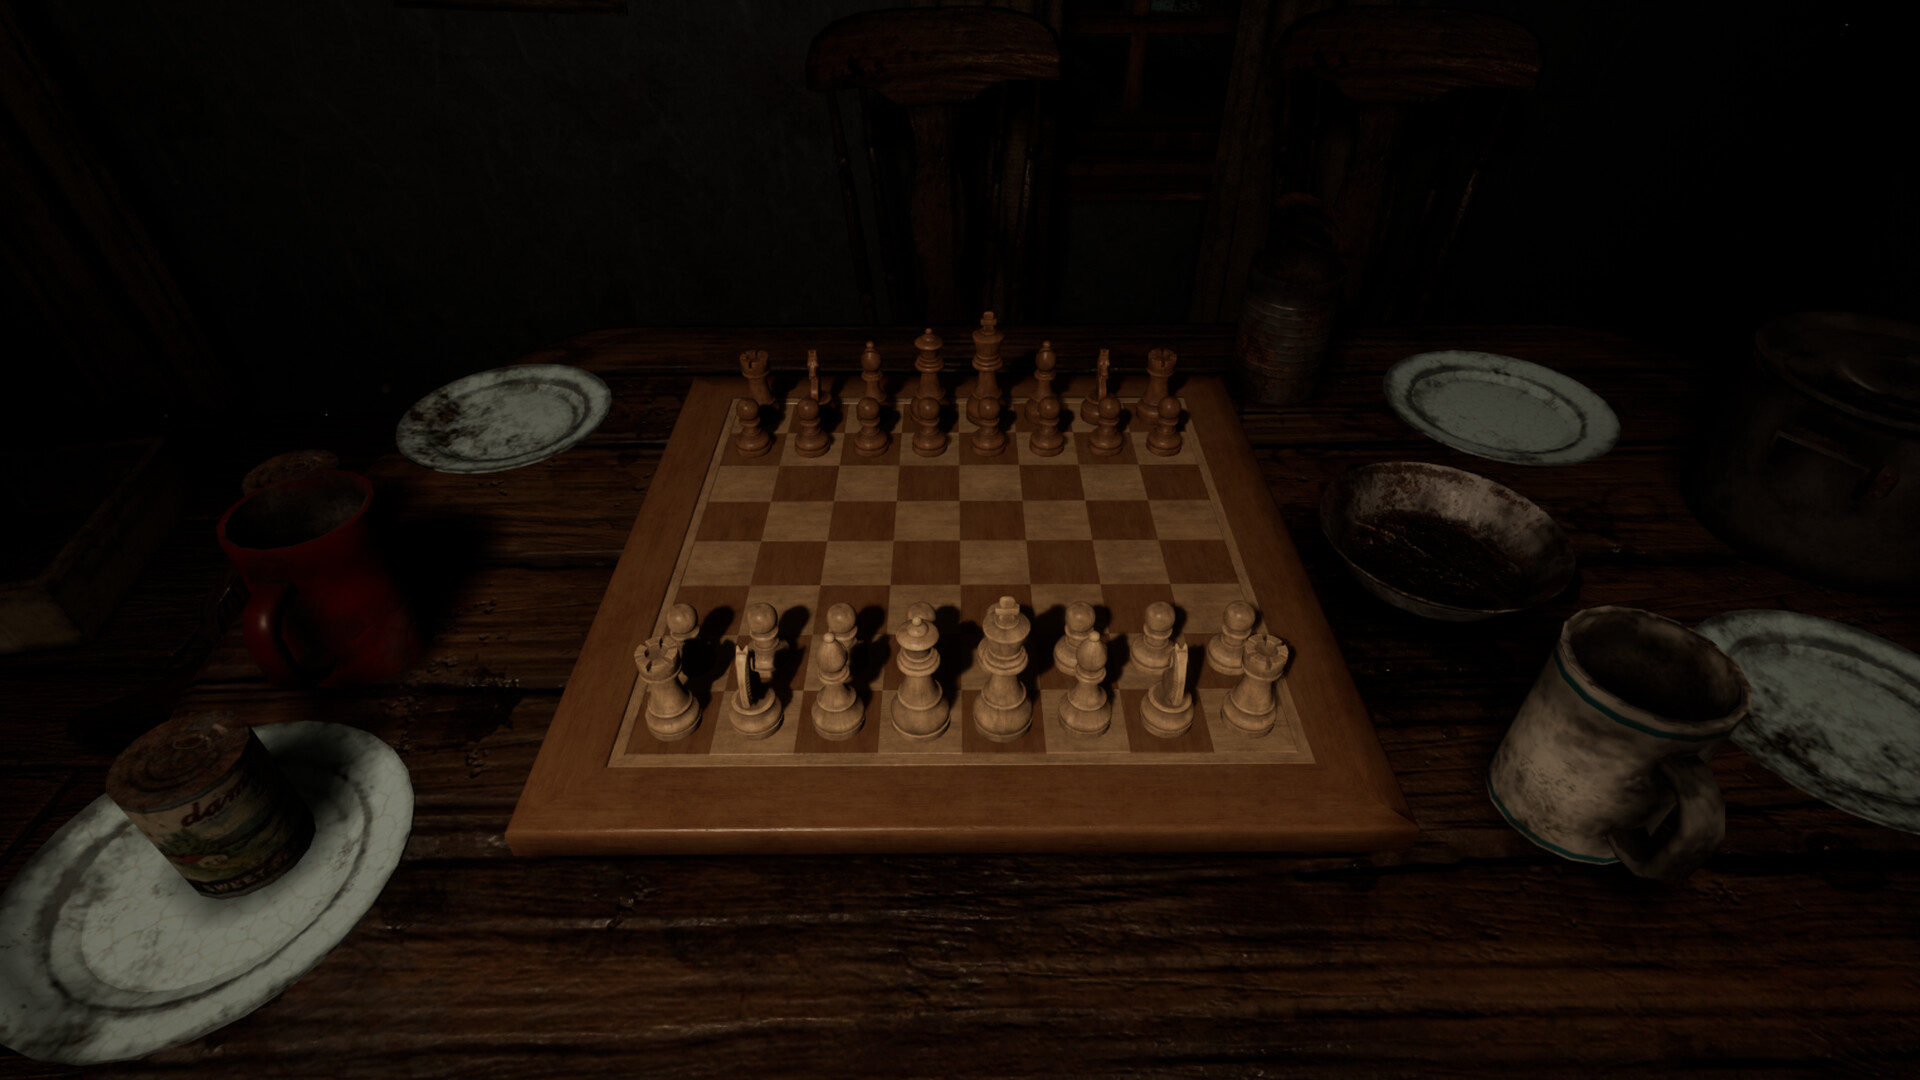 WELCOME TO THE MAGIC CHESS ONLINE WEBSITE 